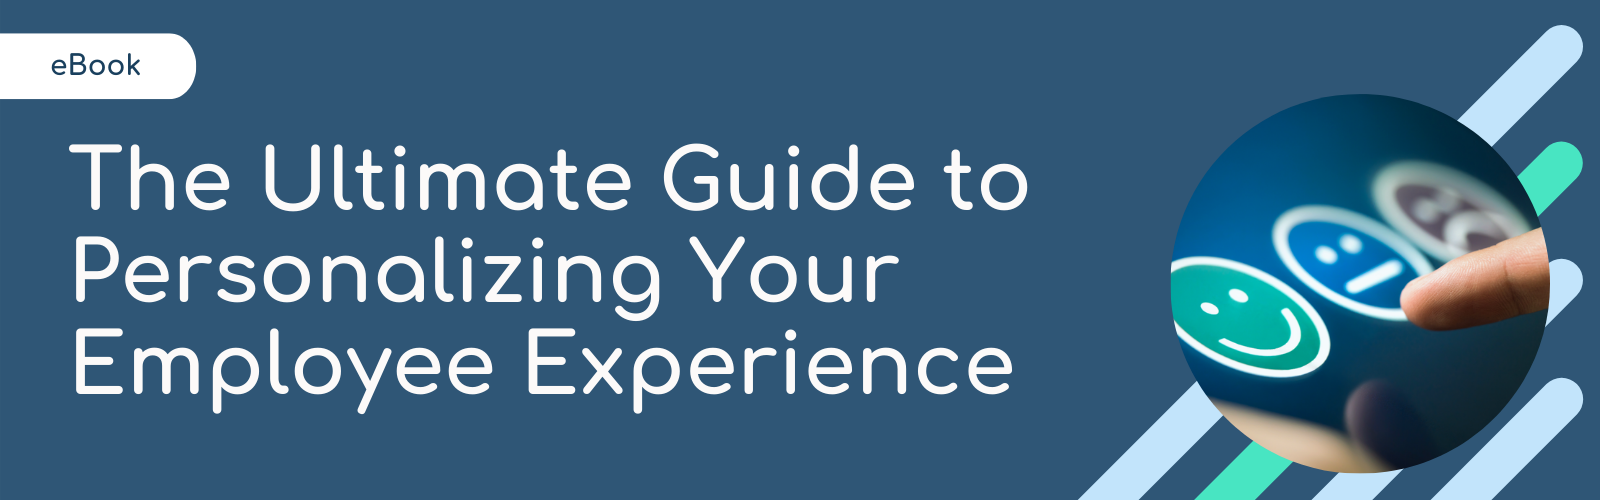 Ultimate Guide to Personalizing Employee Exp. 